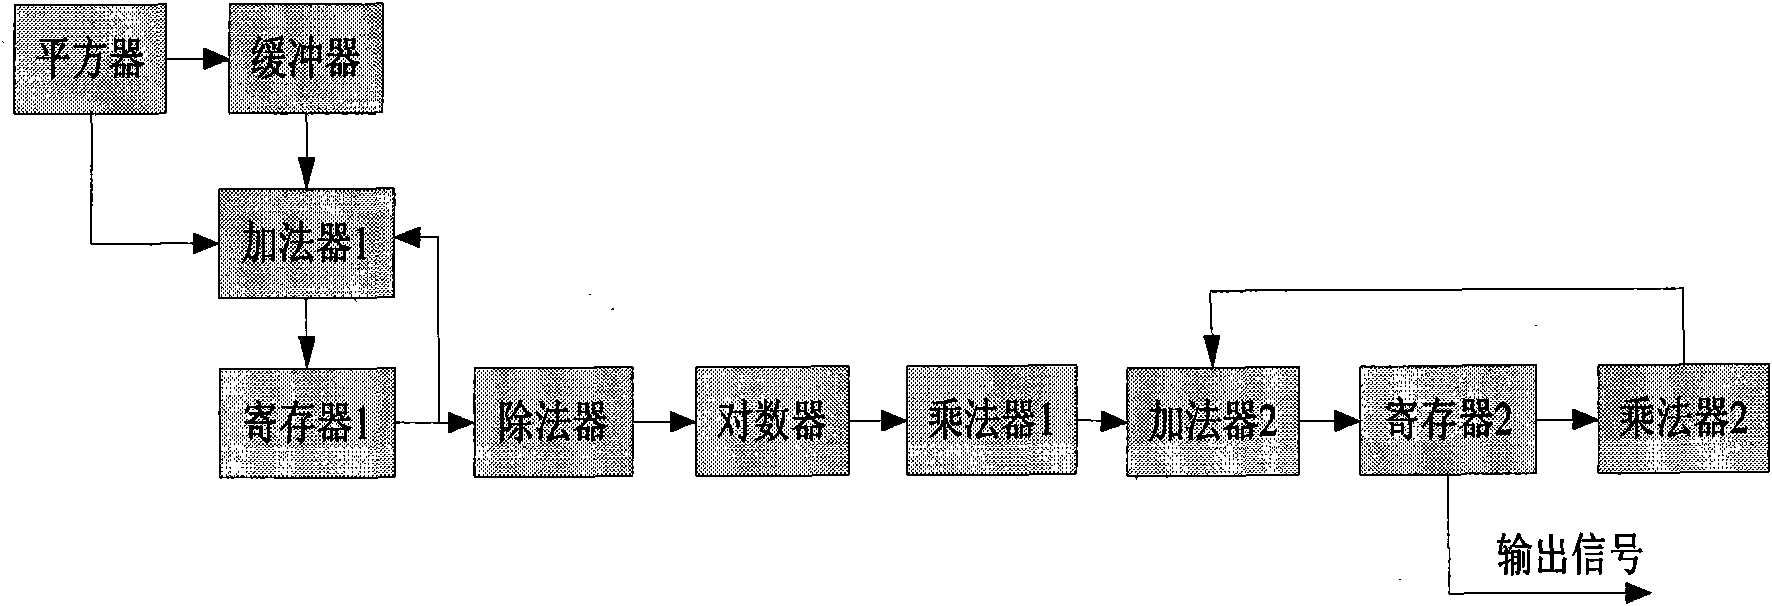 Automatic gain control system in orthogonal frequency division multiplexing receiver and method